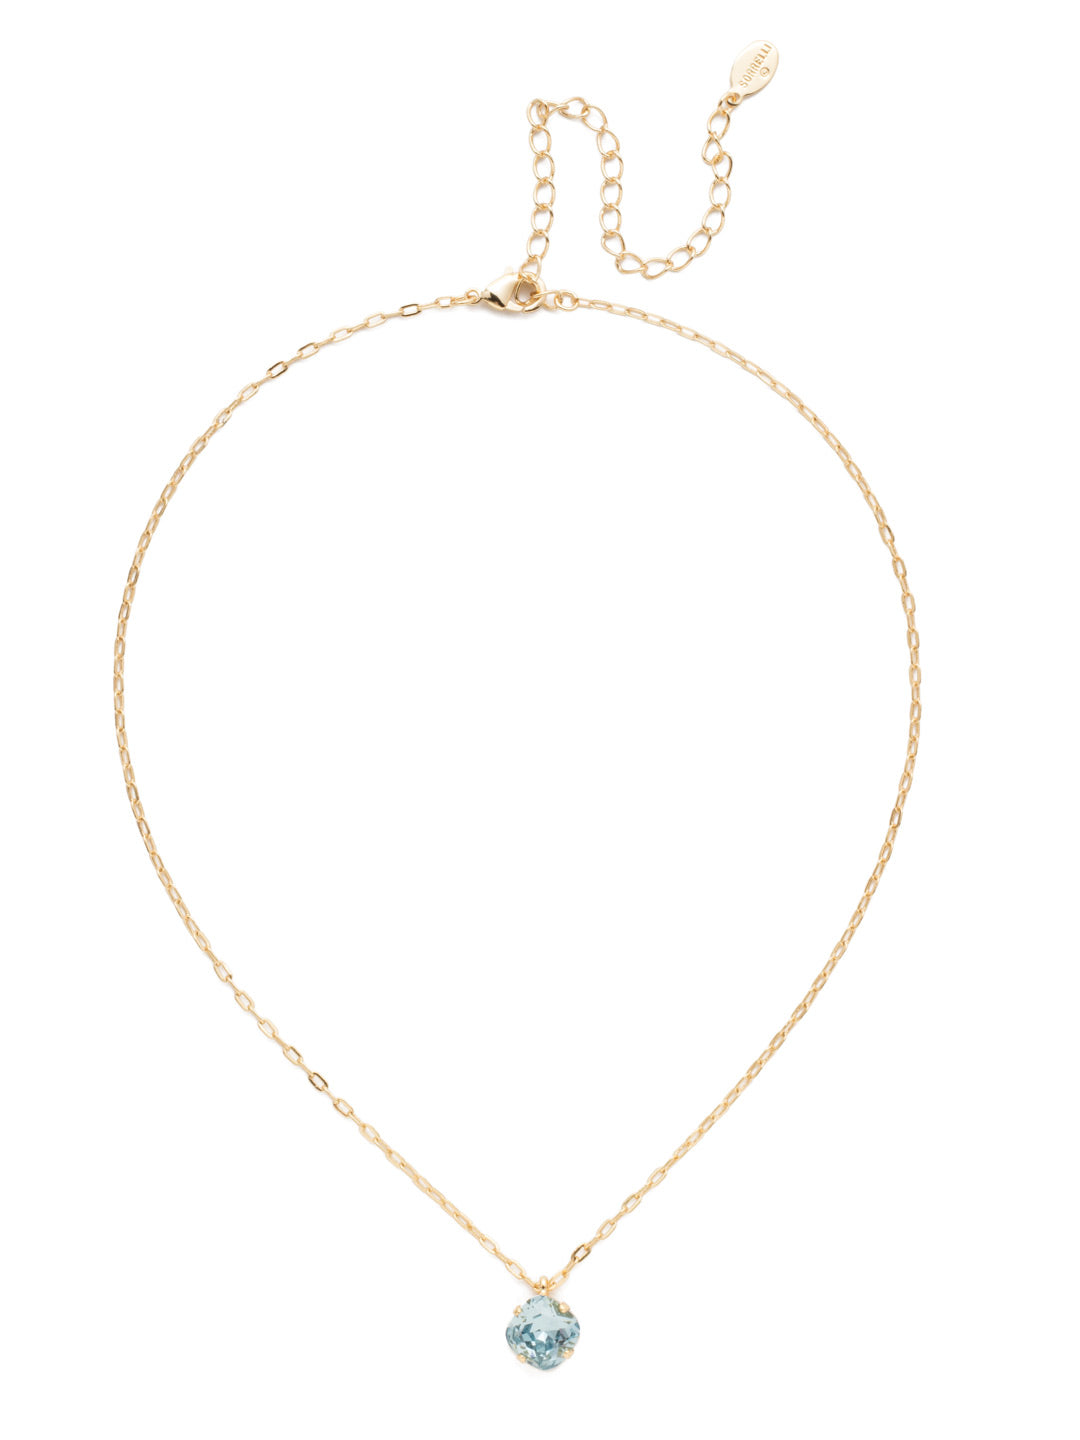 Siren Pendant Necklace - NEP22BGLAQ - <p>With a cushion-cut crystal and delicate chain, the Siren Pendant  will add a litle sparkle to your everyday look. From Sorrelli's Light Aqua collection in our Bright Gold-tone finish.</p>